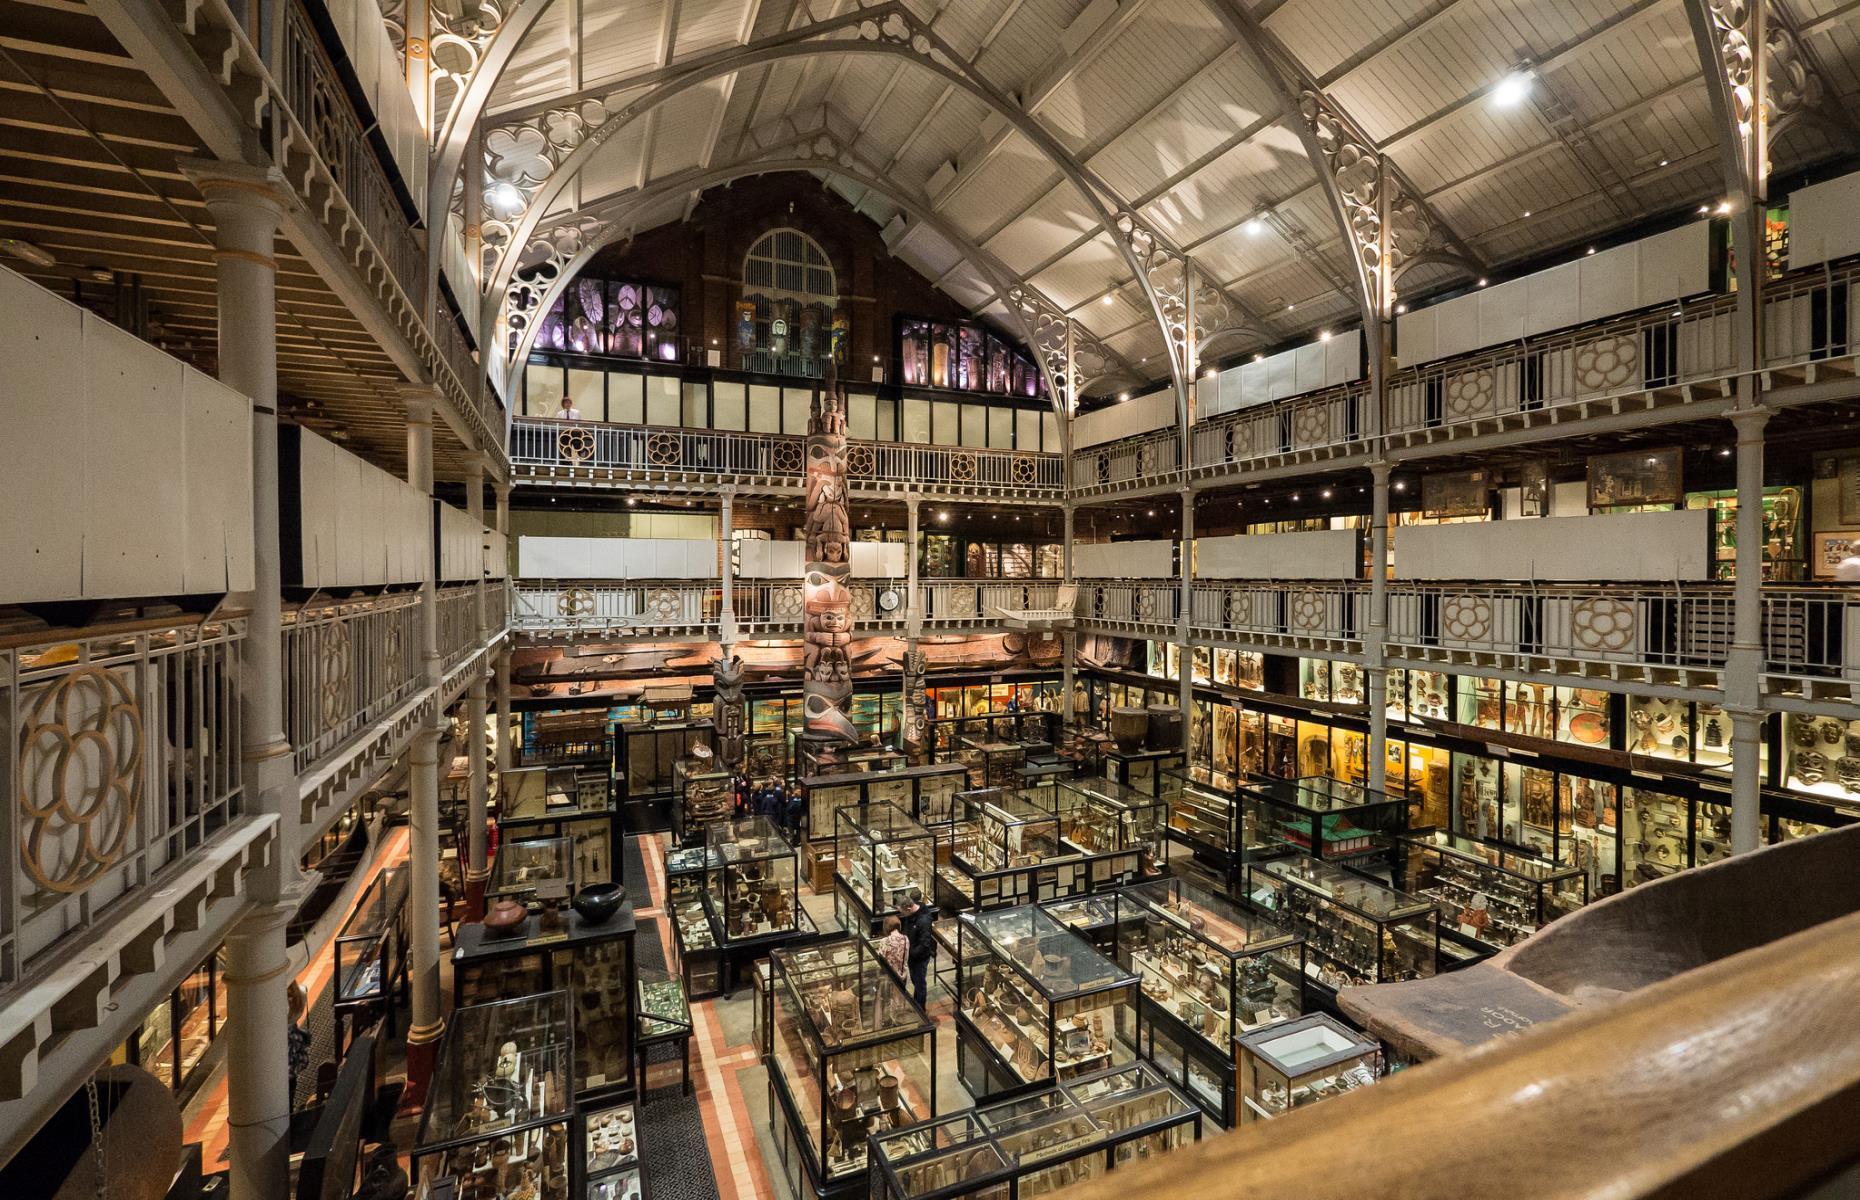 <p>At the rear of the Oxford University Museum of Natural History, the Pitt Rivers Museum in <a href="https://www.loveexploring.com/news/72568/the-top-things-to-do-in-oxford-attractions">Oxford</a> is home to over half a million archaeological and ethnographic objects. Founded in 1884, it was named after General Pitt-Rivers who donated his collection to the university. Today, the collection of items are from all over the world, ranging from ancient amulets and charms to an impressive amount of 19th and early 20th century photographs.</p>